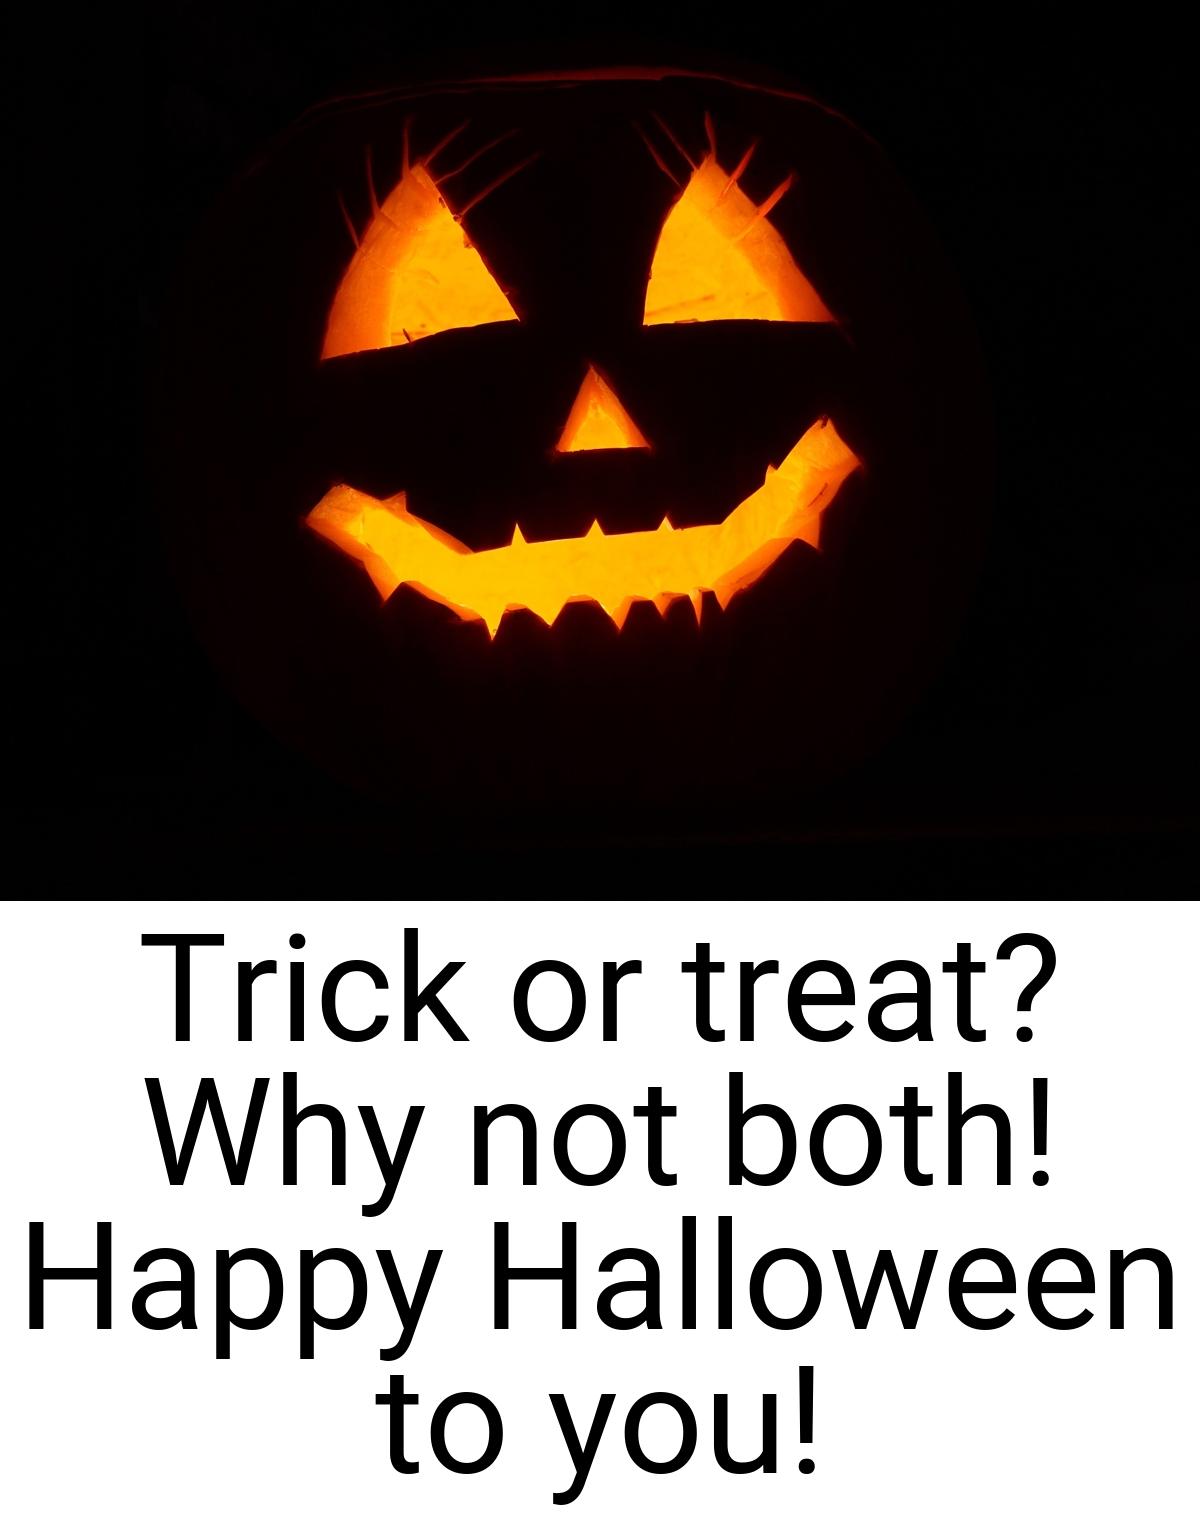 Trick or treat? Why not both! Happy Halloween to you